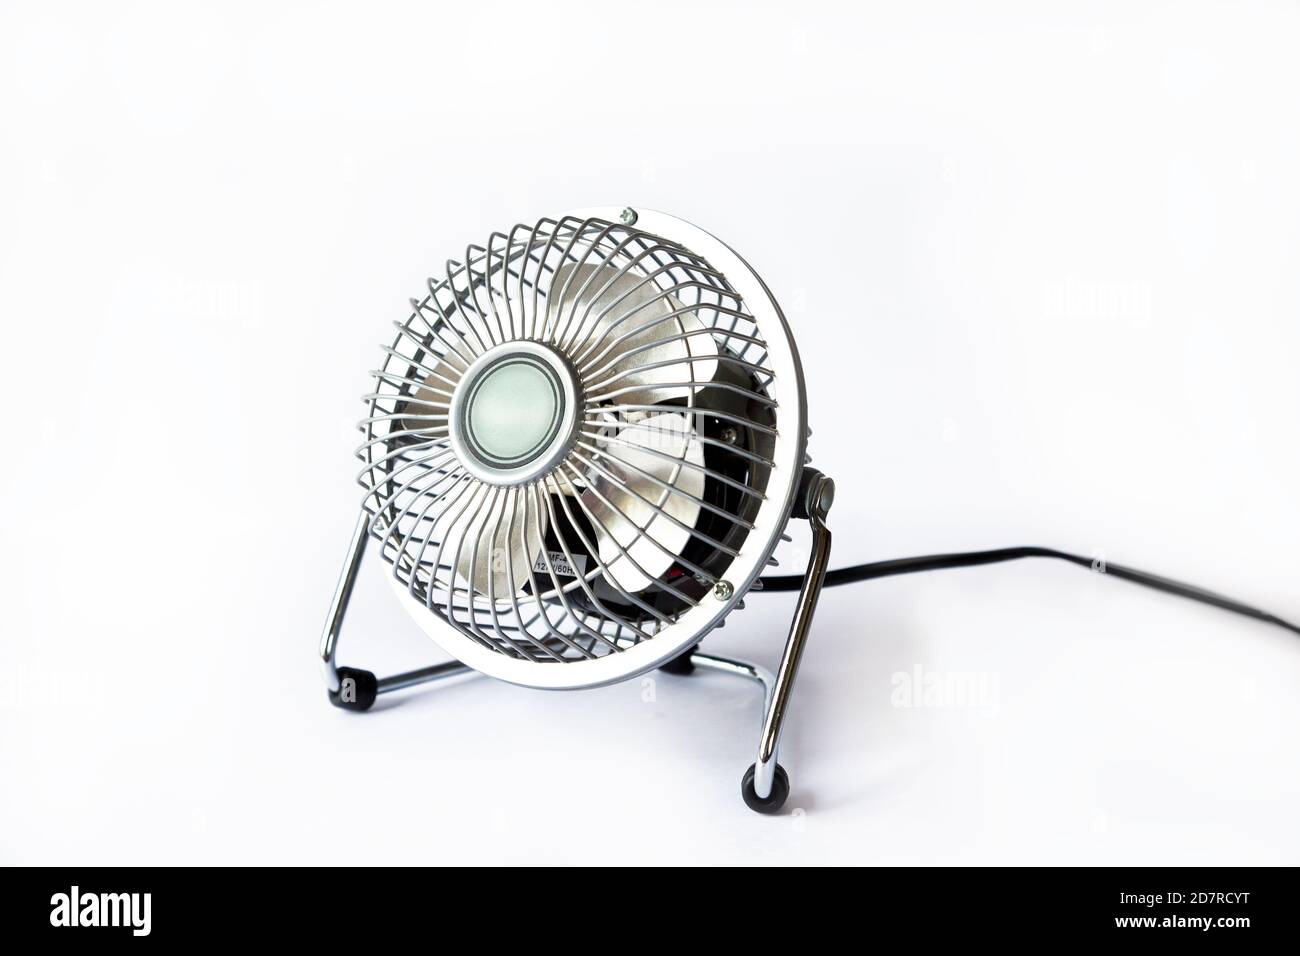 Closeup shot of a mechanical fan isolated on a white background Stock Photo  - Alamy